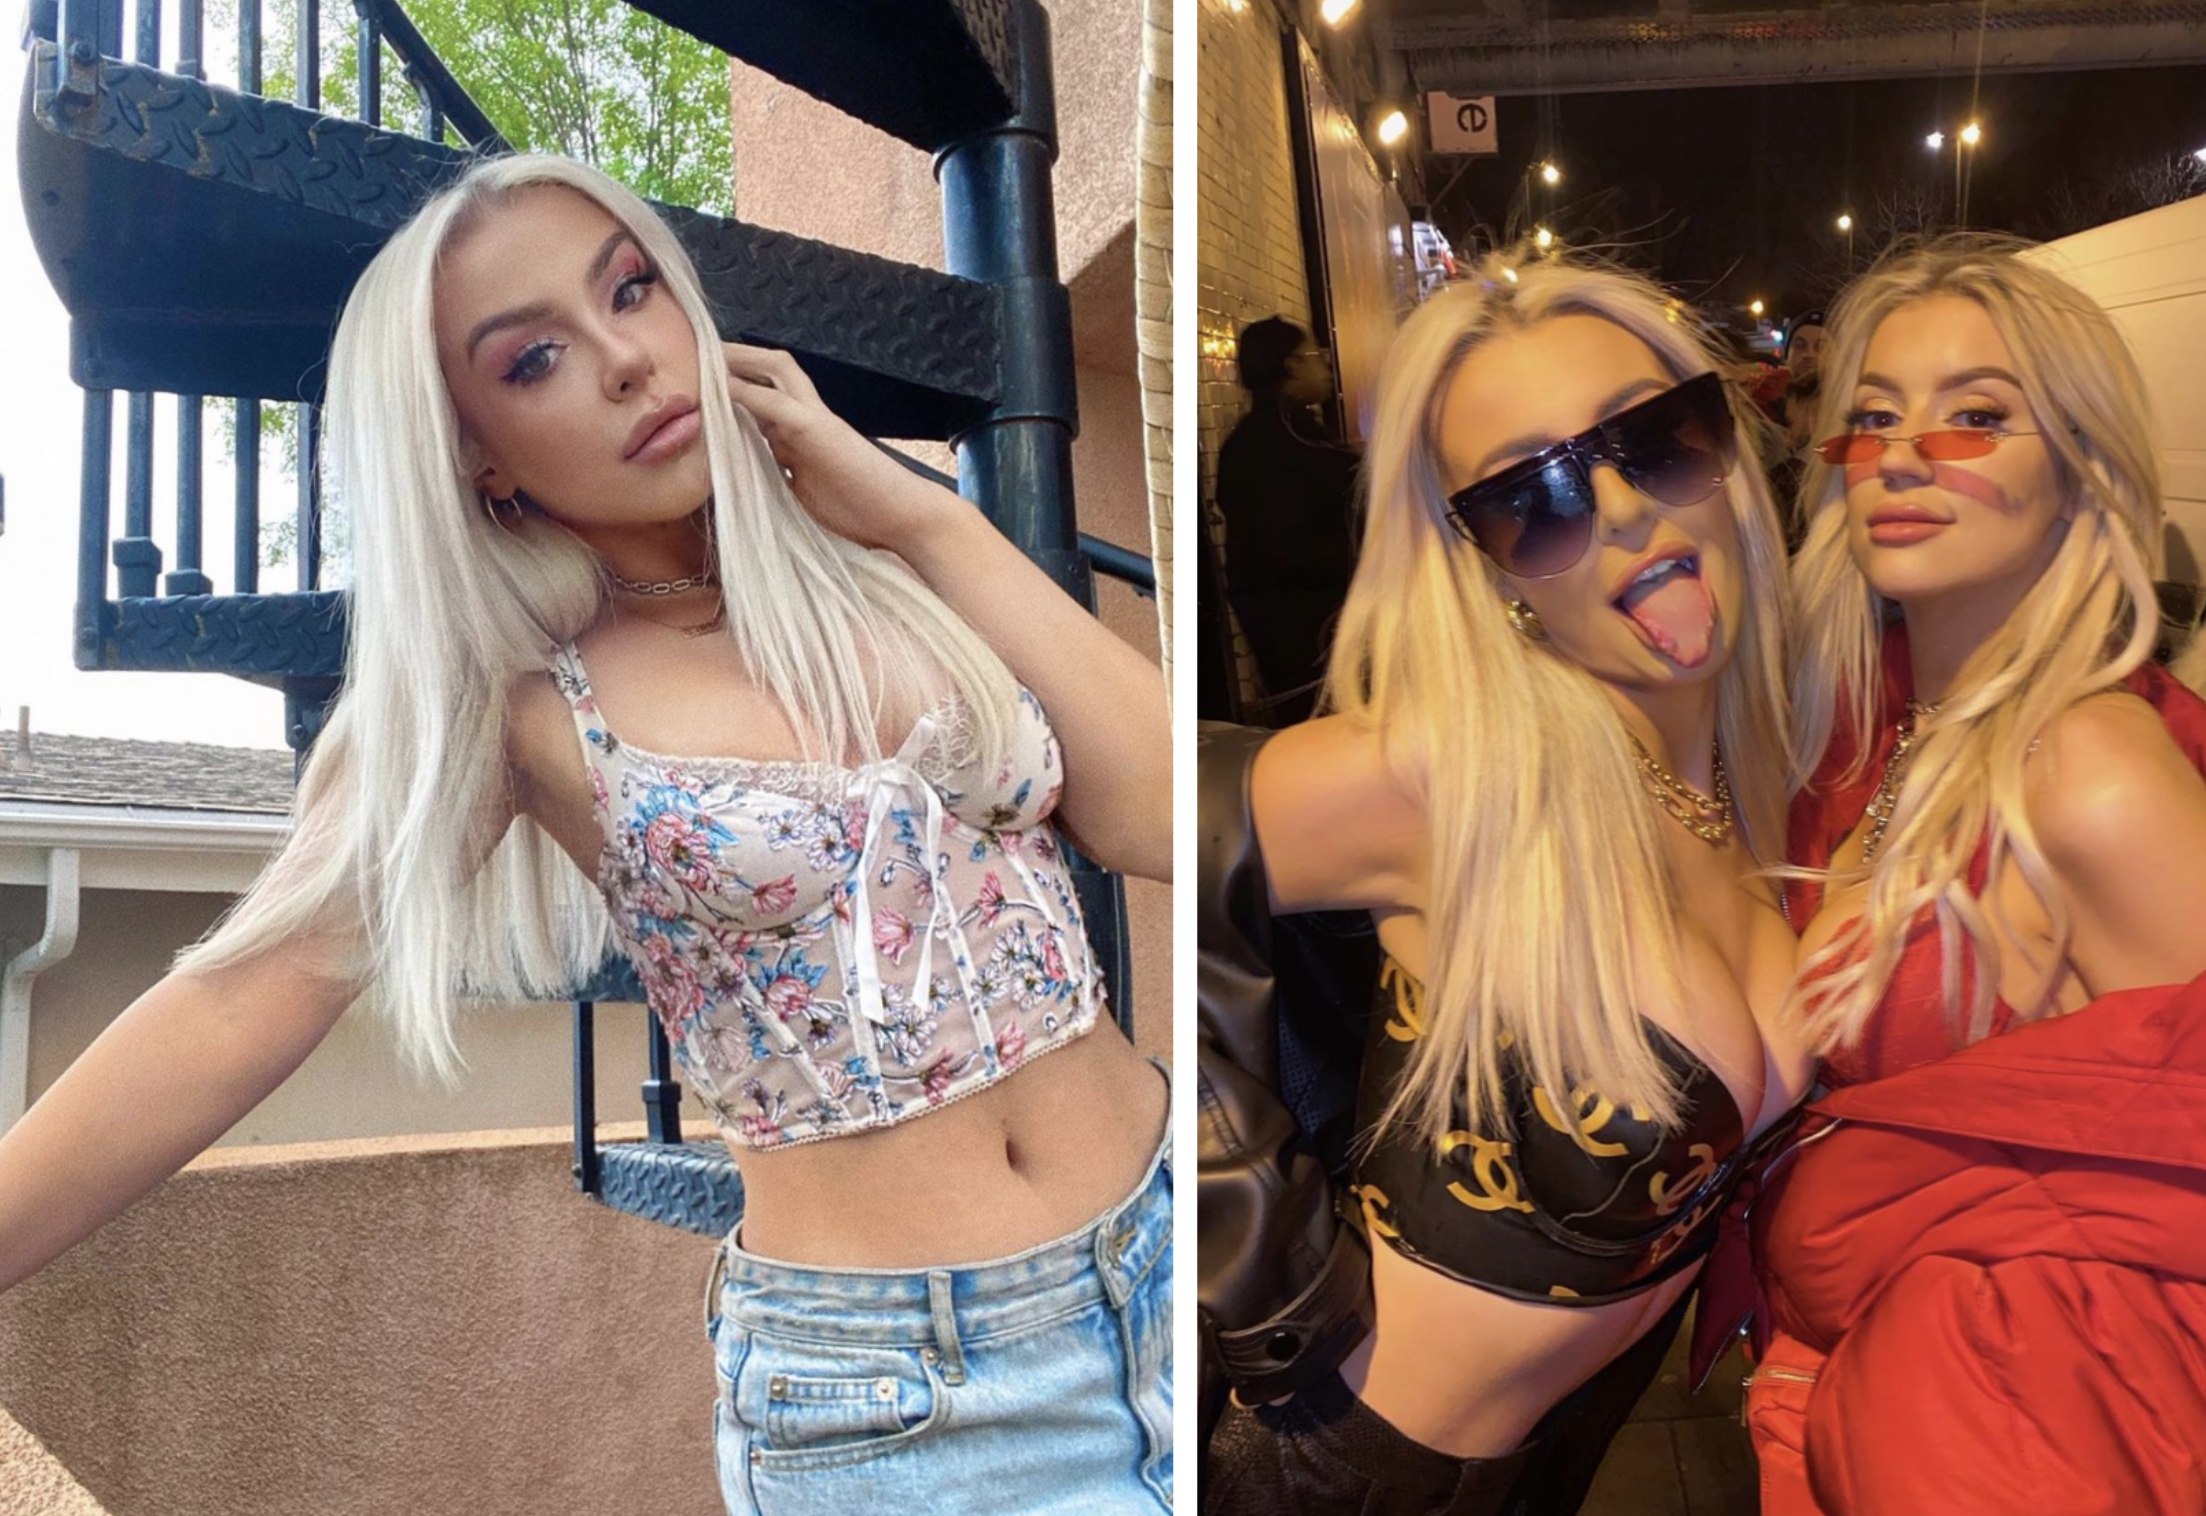 Tana Mongeau Is The Latest Influencer To Join OnlyFans And Charge Fans.